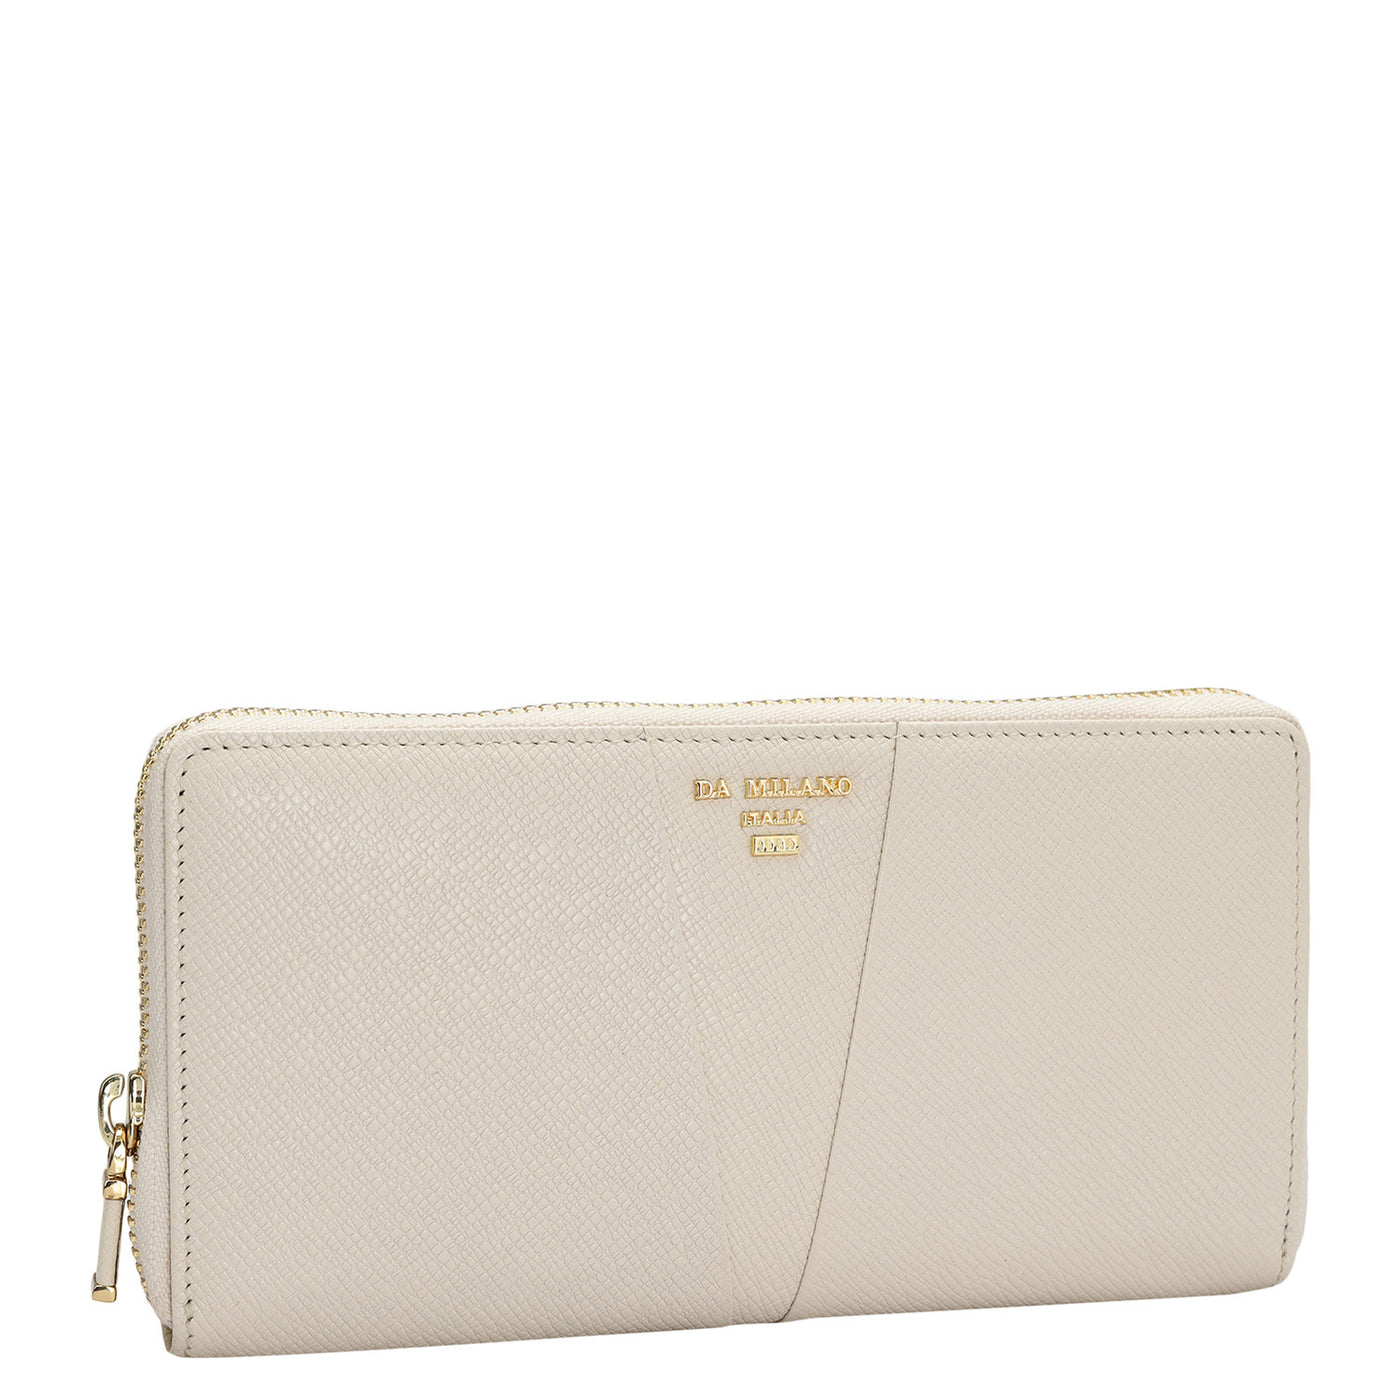 Franzy Leather Ladies Wallet - Off White